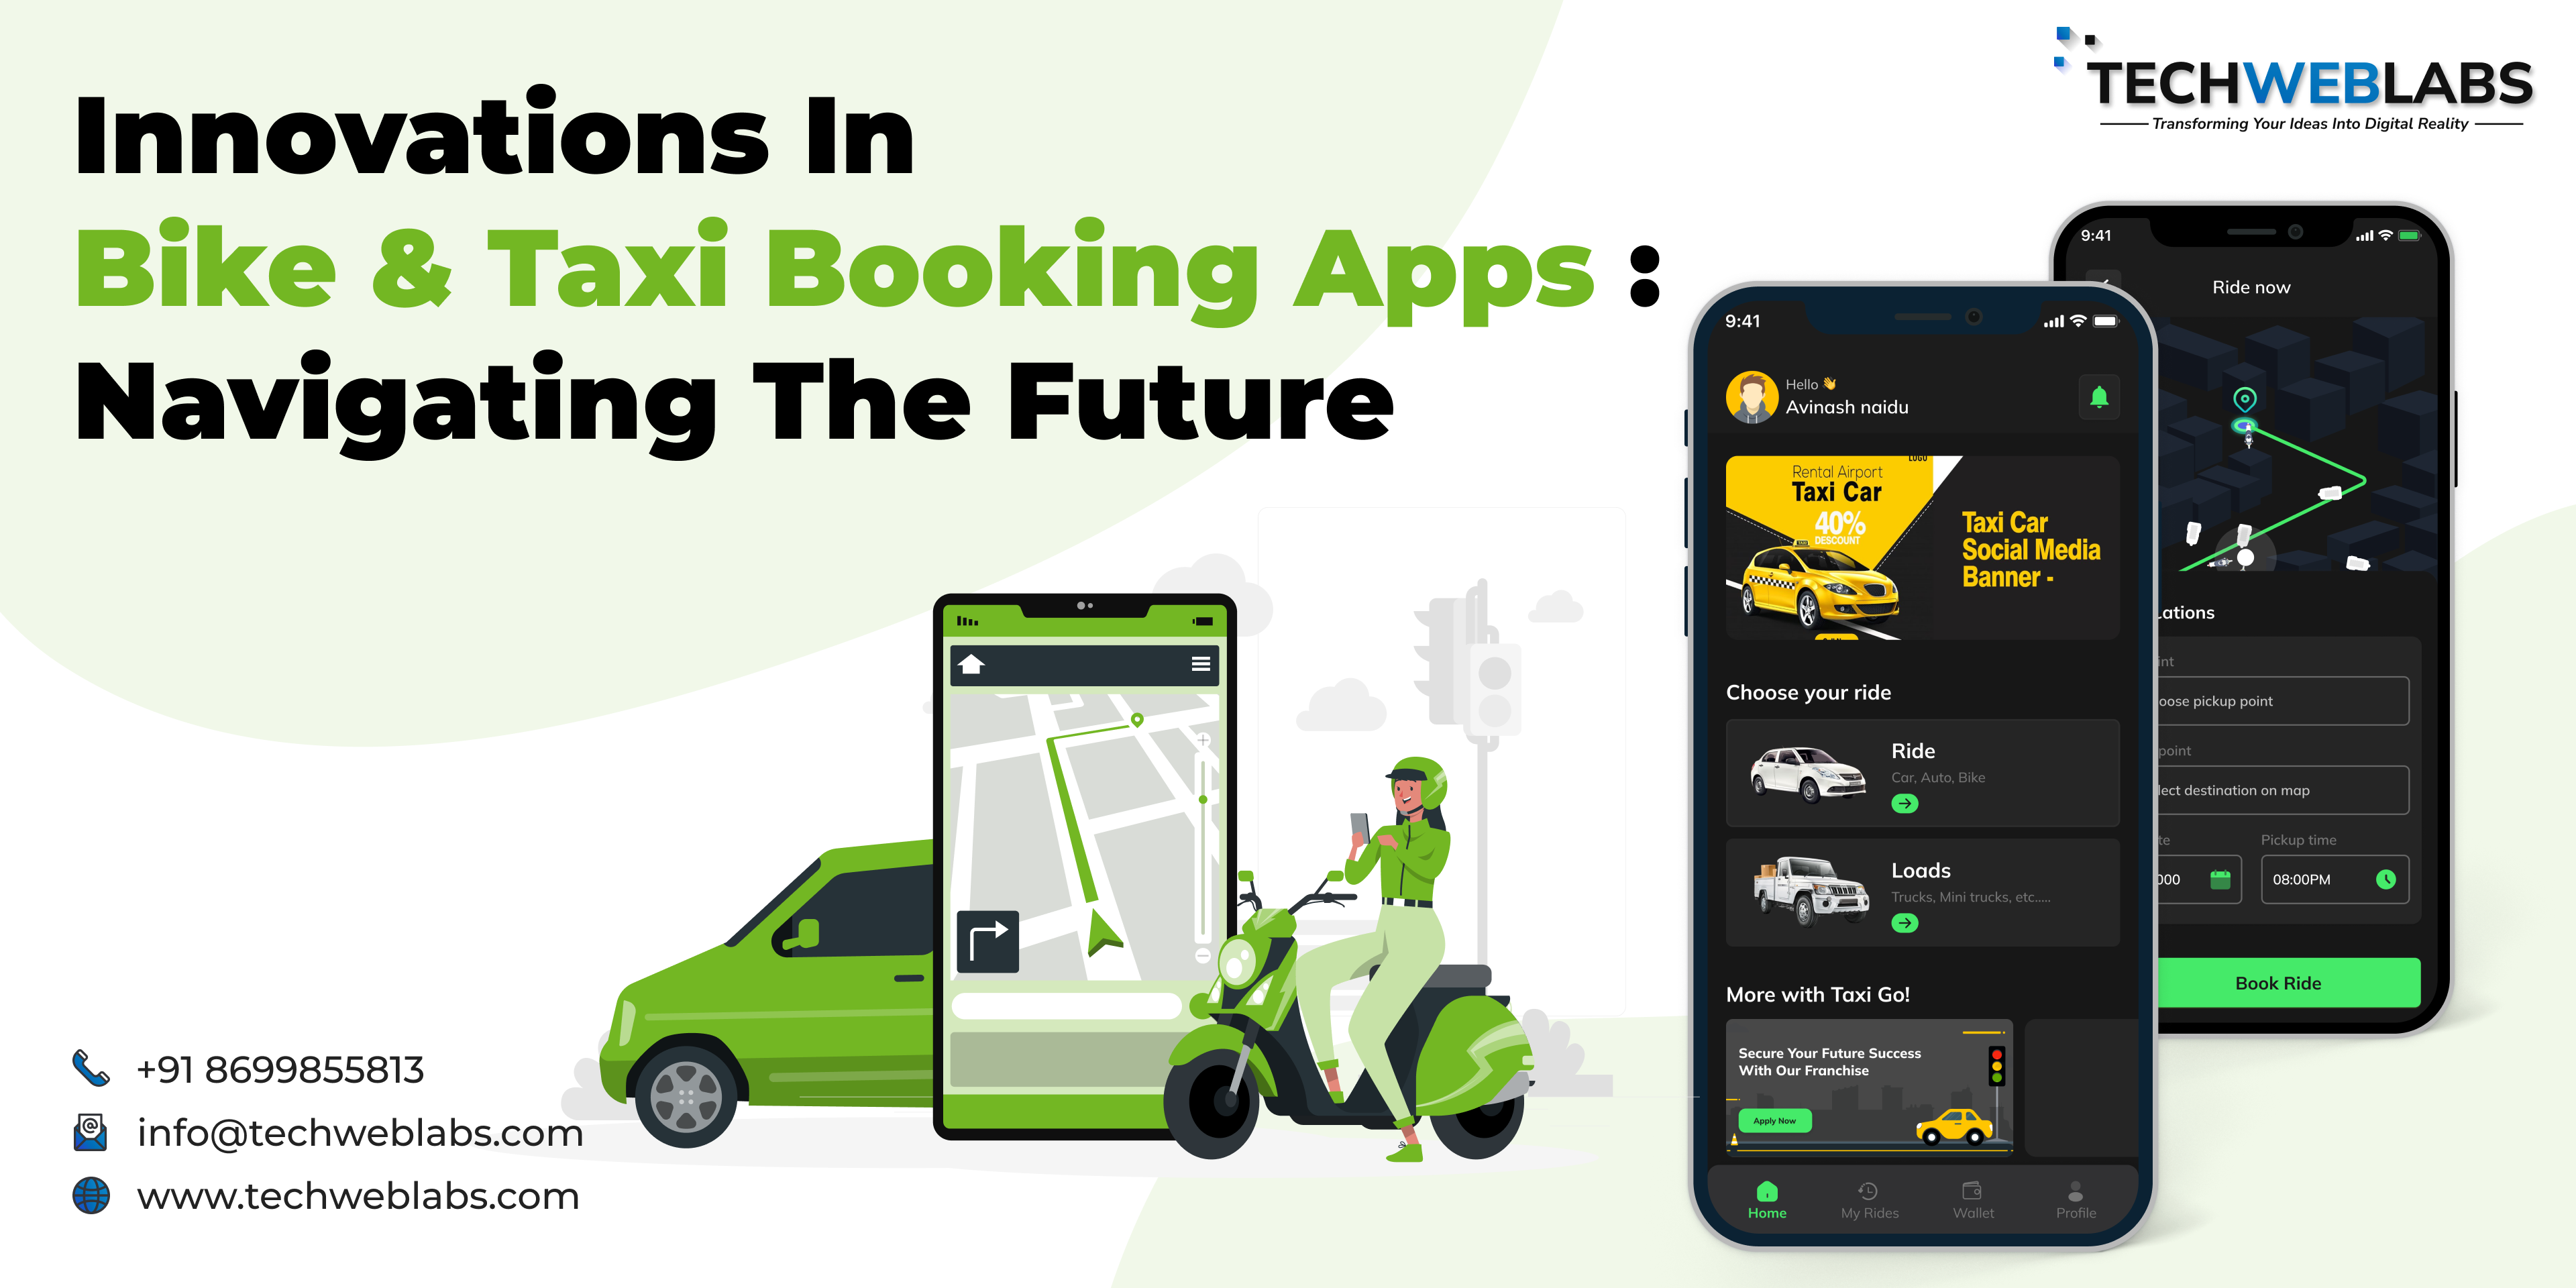 Innovations in Bike & Taxi Booking Apps Navigating the Future